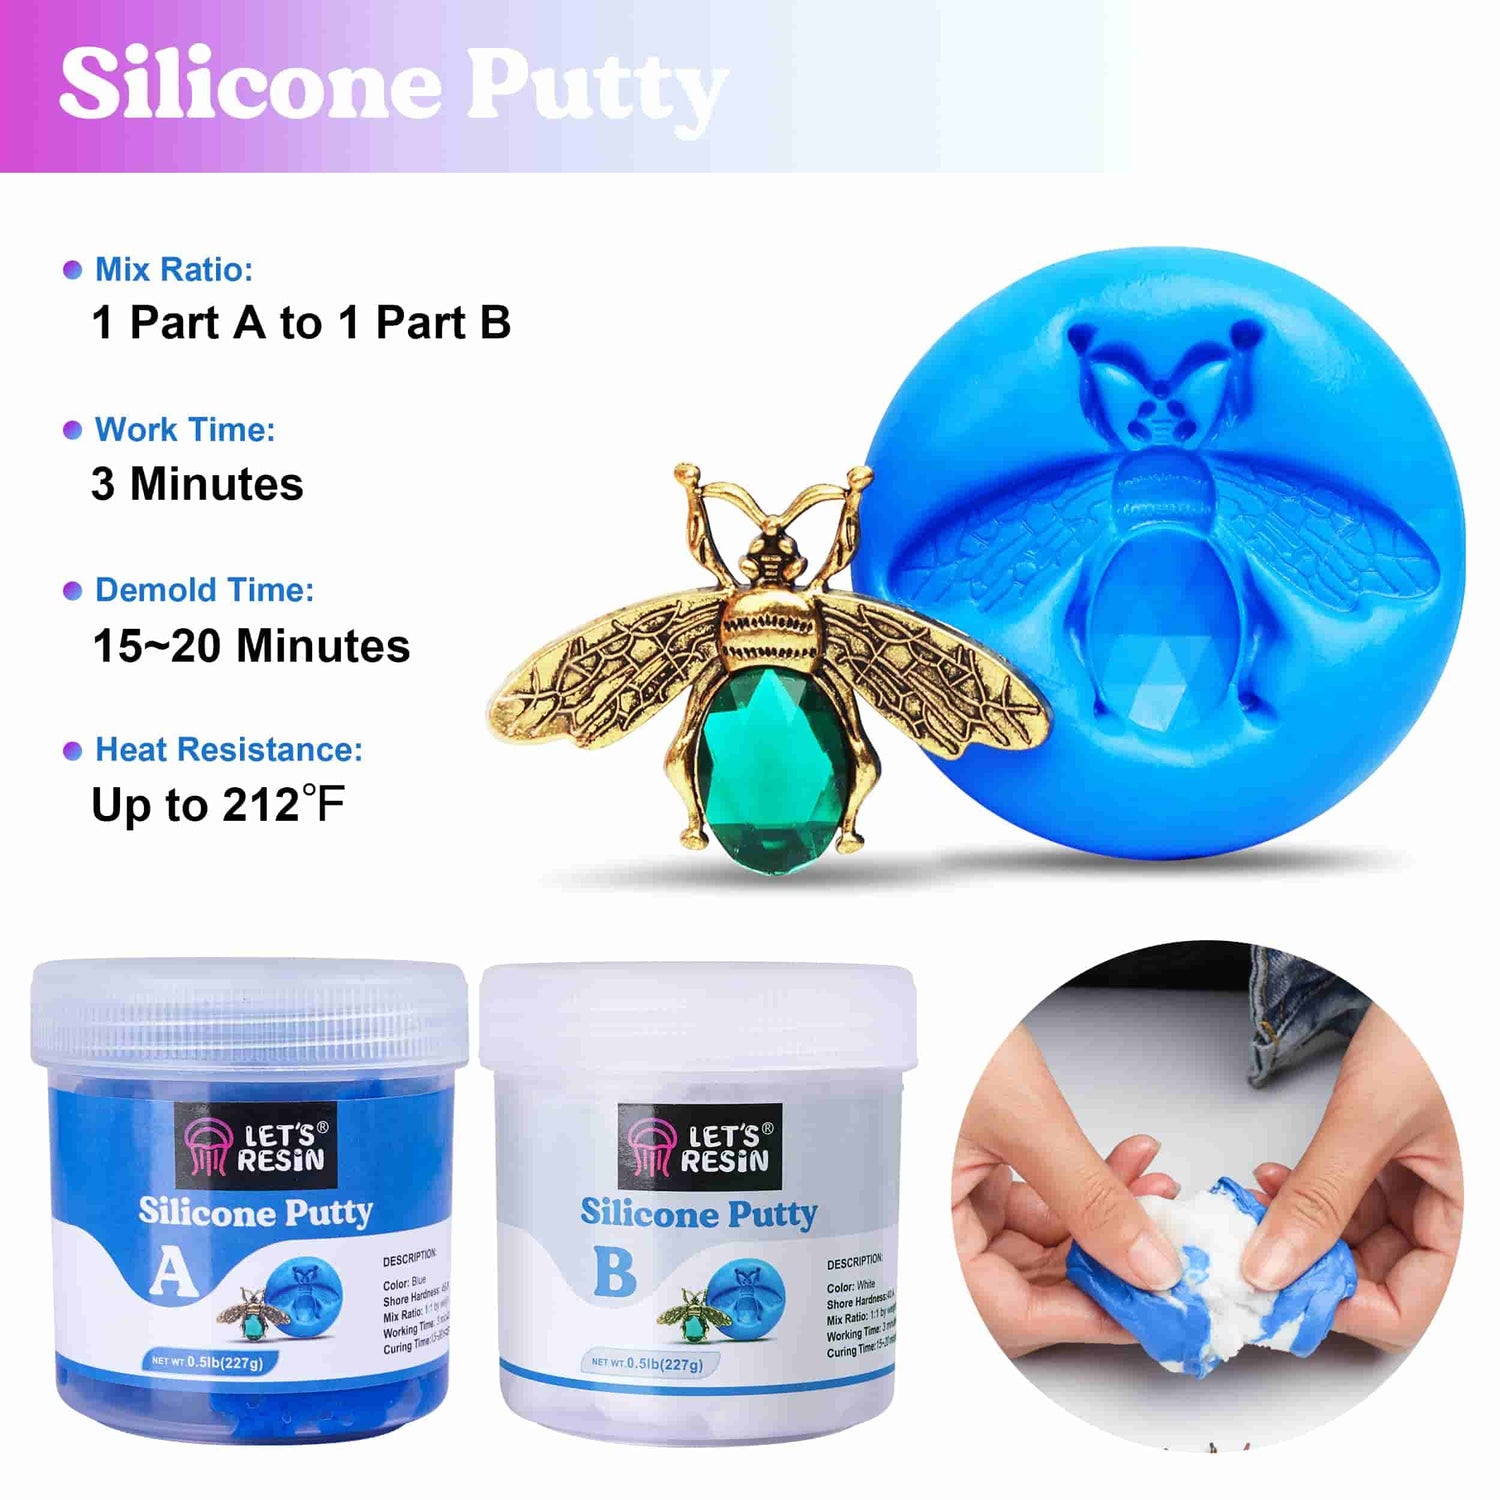 LET'S RESIN Silicone Putty,1LB Silicone Mold Making Kit,  Non-Toxic,Strong&Flexible, Easy 1:1 Mixing Ratio for Reusable Silicone Molds,  Resin Molds, Plaster, Soap – Let's Resin